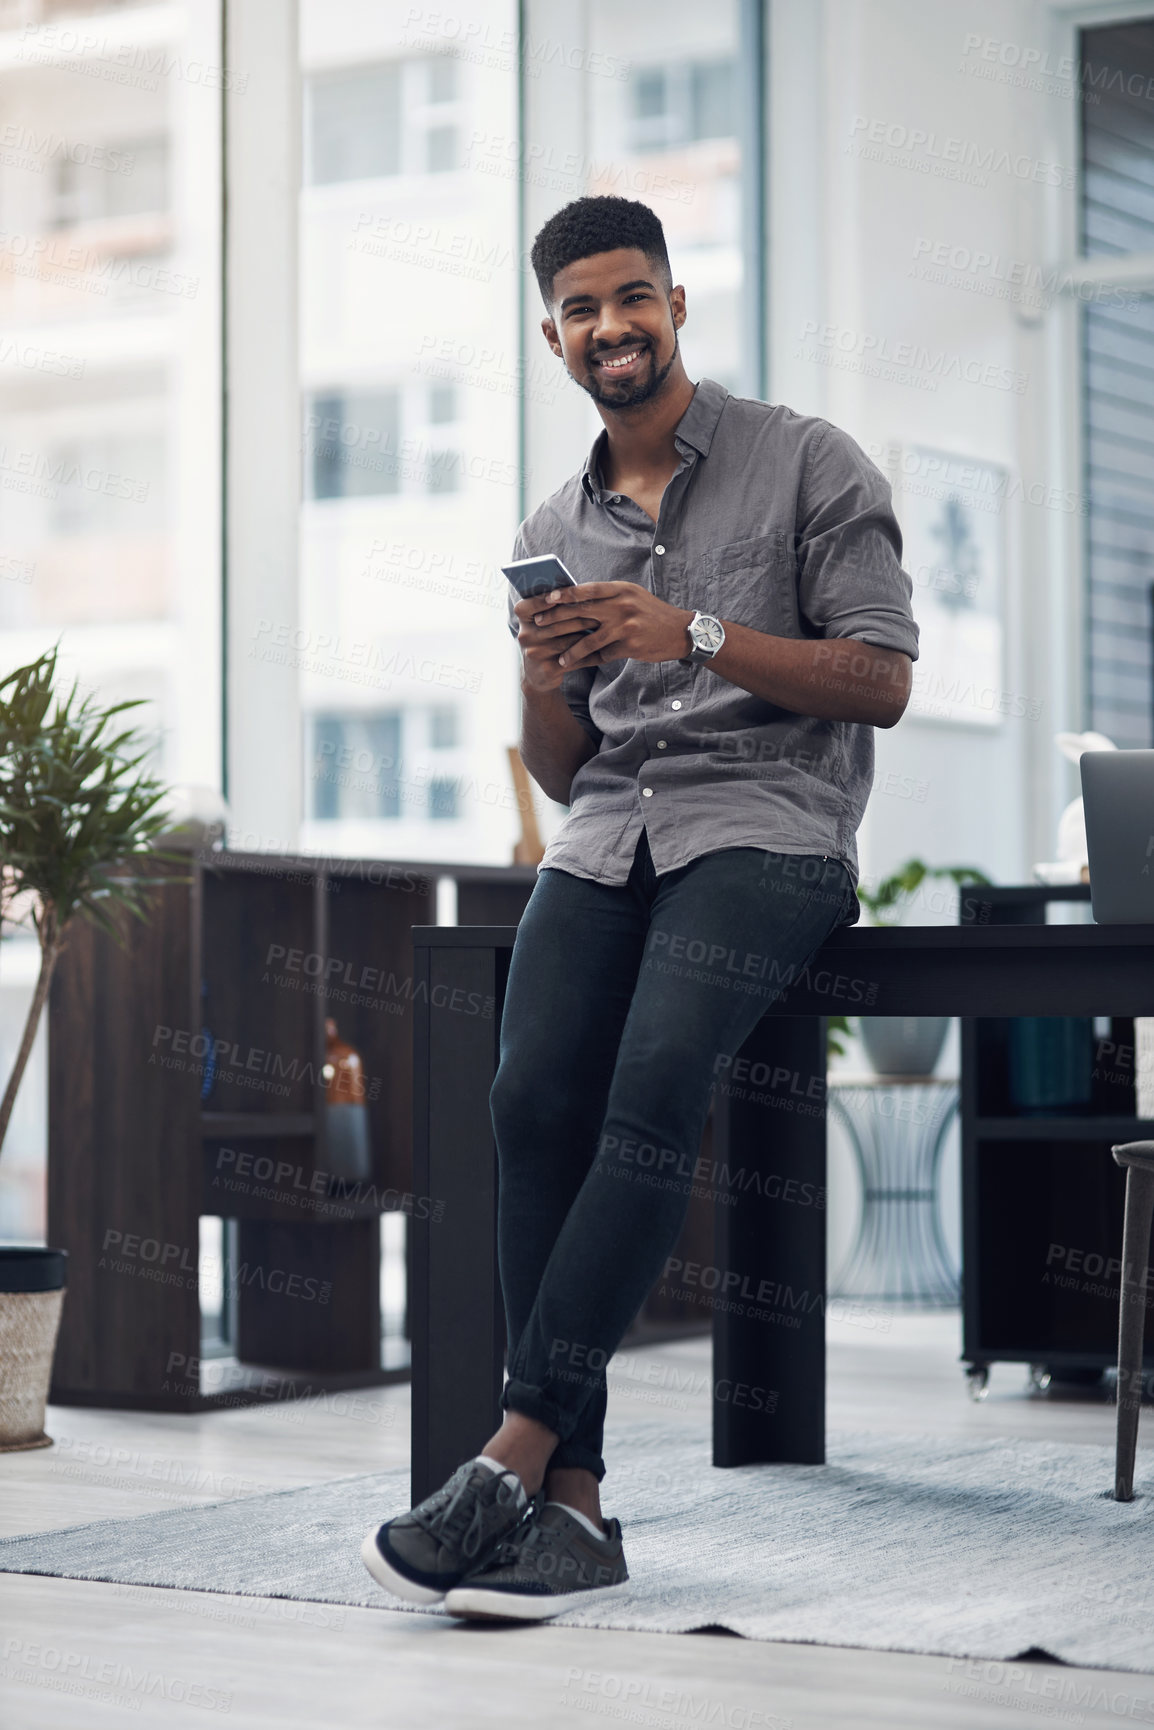 Buy stock photo Portrait of a young businessman using a cellphone in an office